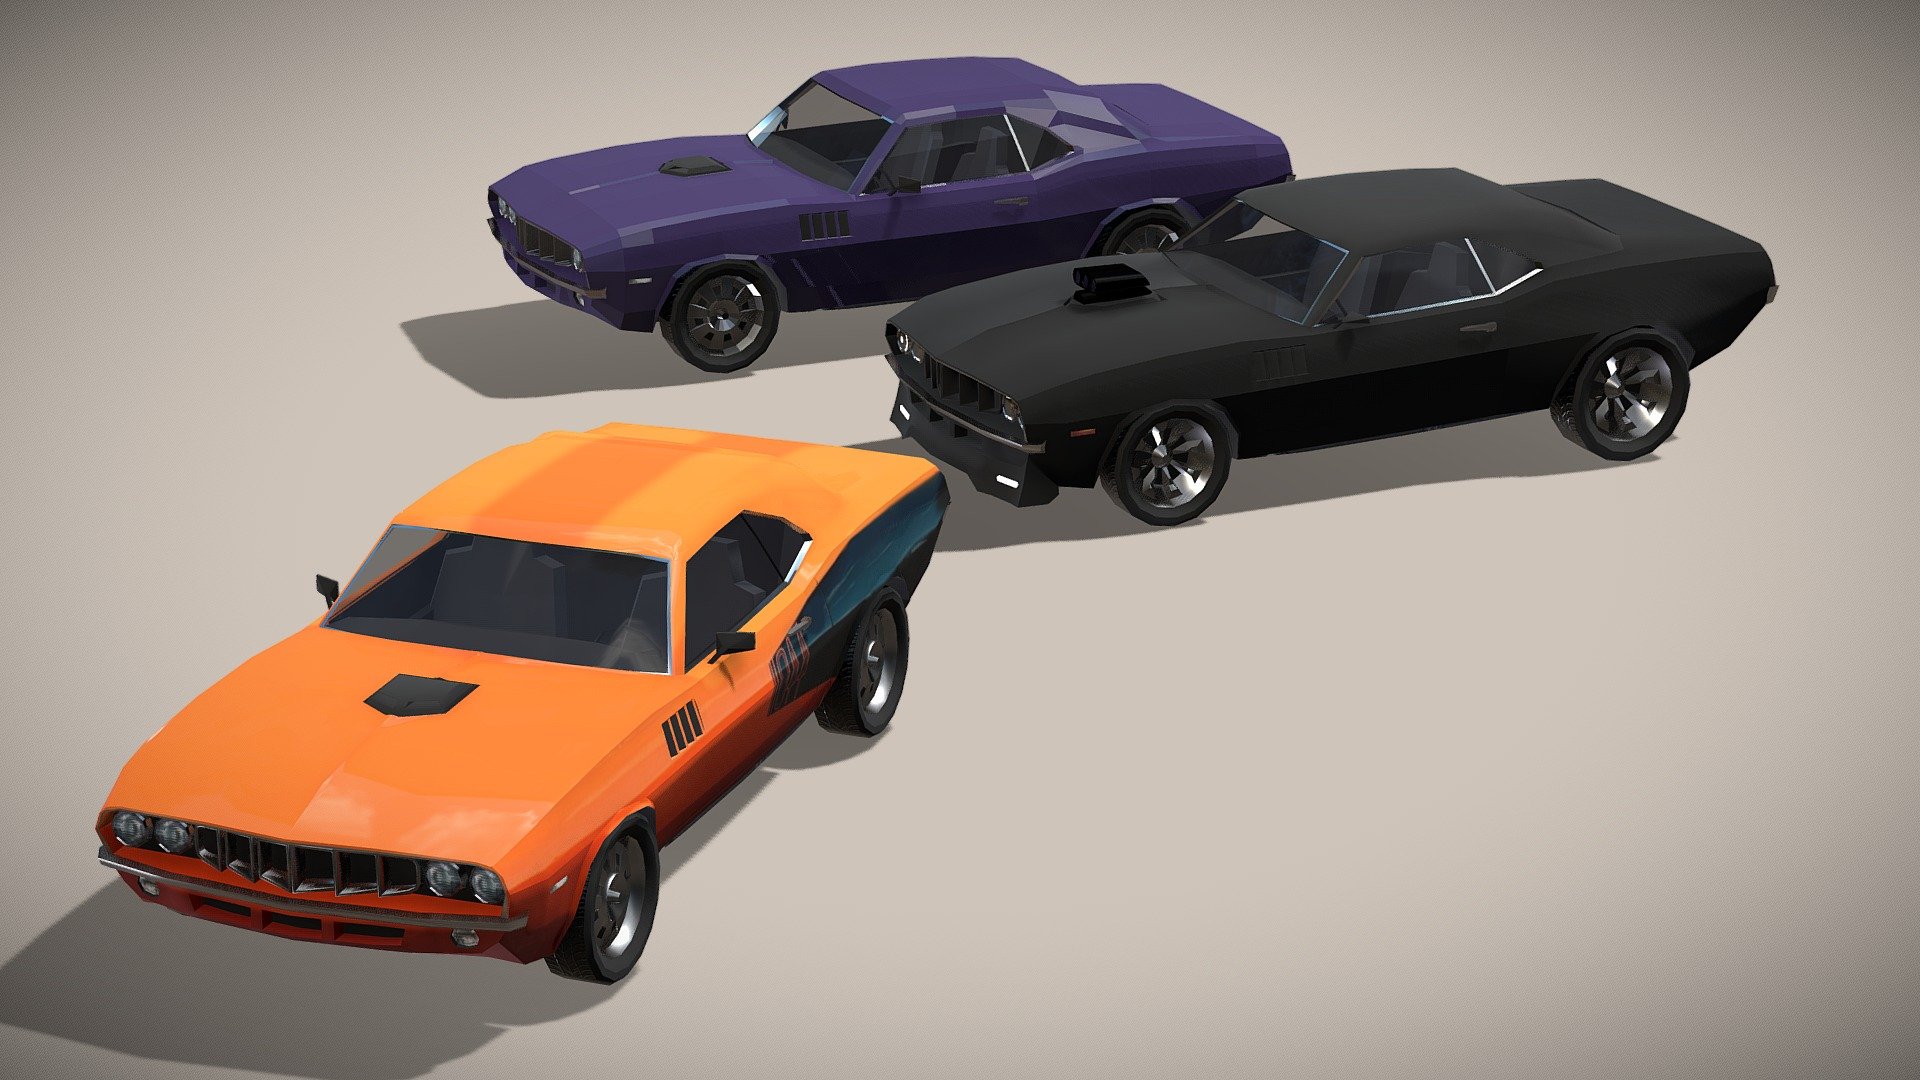 Plymouth Barracuda 1971

Lowpoly model of american muscle car



The Plymouth Barracuda is a two-door pony car that was manufactured by Plymouth from 1964 to 1974.

The 1st-generation Barracuda was based on the Chrysler A-body and was offered from 1964 to 1966.

The 2nd-generation Barracuda, though still Valiant-based, was heavily redesigned. Built from 1967 to 1969, it was available as a two-door in fastback, notchback, and convertible versions.

The 3rd-generation, offered from 1970 to 1974, was based on the Chrysler E-body, exclusive to it and the slightly larger Dodge Challenger. A completely new design, the two-door Barracuda was available in hardtop and convertible body styles.
Barracuda tuned version with Hemi big block V8 engine was called Hemicuda.


3 cars in set: Basic model + flat shaded model + tuned version. Each with own texture.



Check also my other aircrafts and cars

Patreon with monthly free model - Plymouth Barracuda 1971 - Buy Royalty Free 3D model by NETRUNNER_pl 3d model